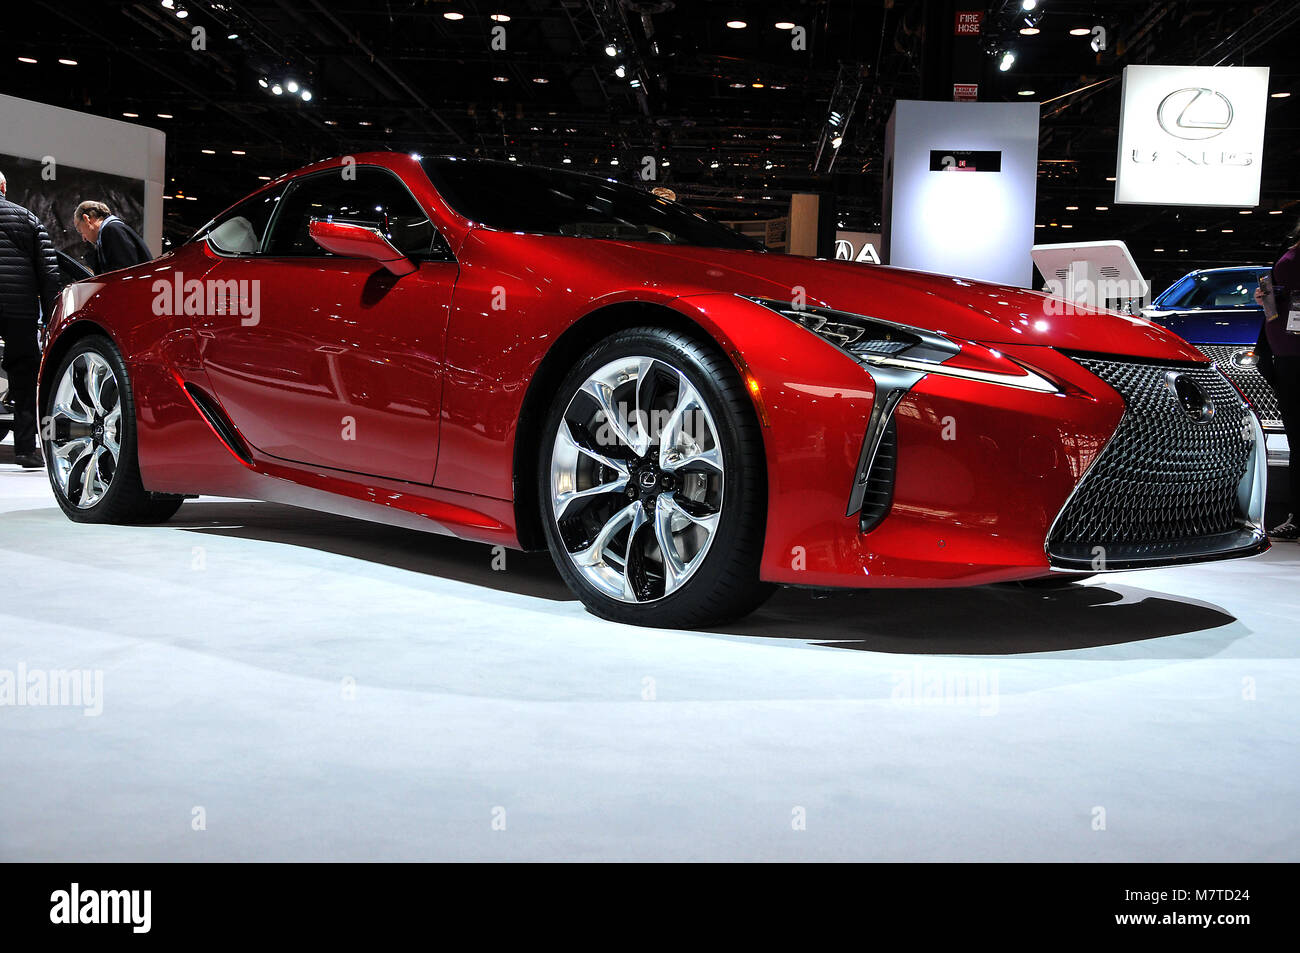 The 2018 Chicago Auto Show Press Preview at McCormick Place in Chicago IL, USA  Featuring: Lexus LC 500 Where: Chicago, Illinois, United States When: 08 Feb 2018 Credit: Adam Bielawski/WENN.com Stock Photo